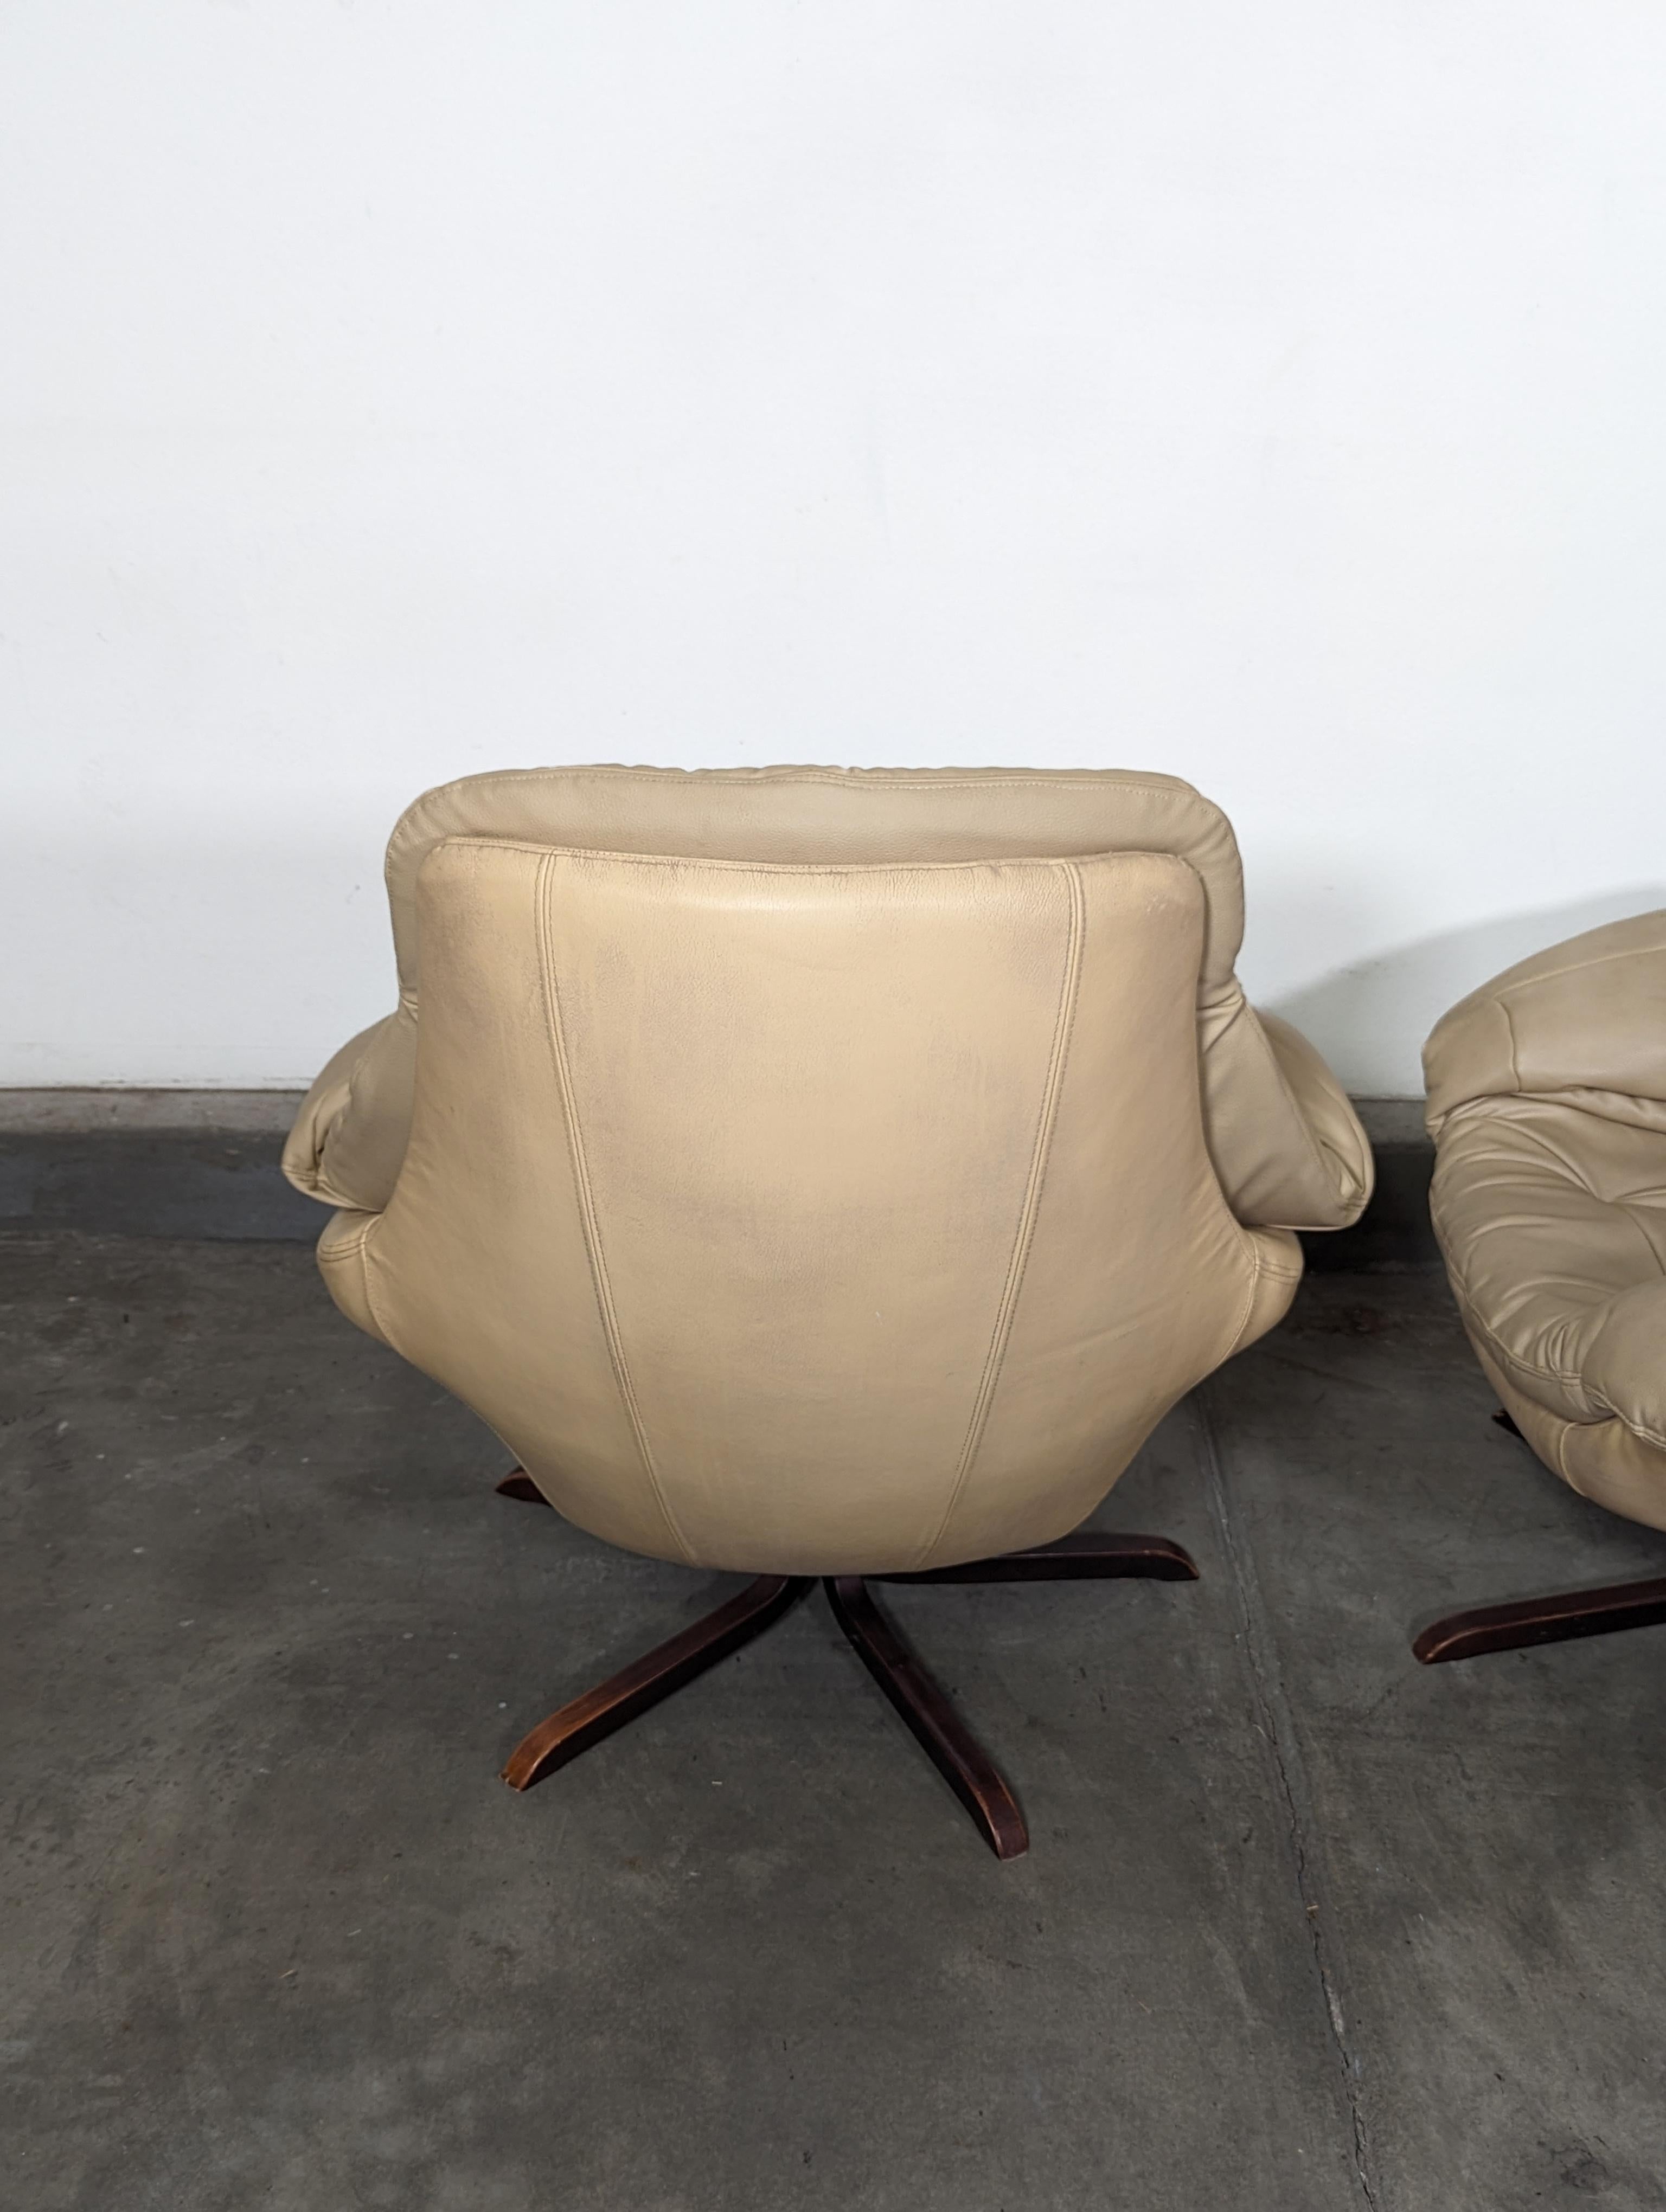 Mid Century Modern Swivel Leather Lounge Chairs by H.W. Klein for Bramin, c1970s For Sale 3